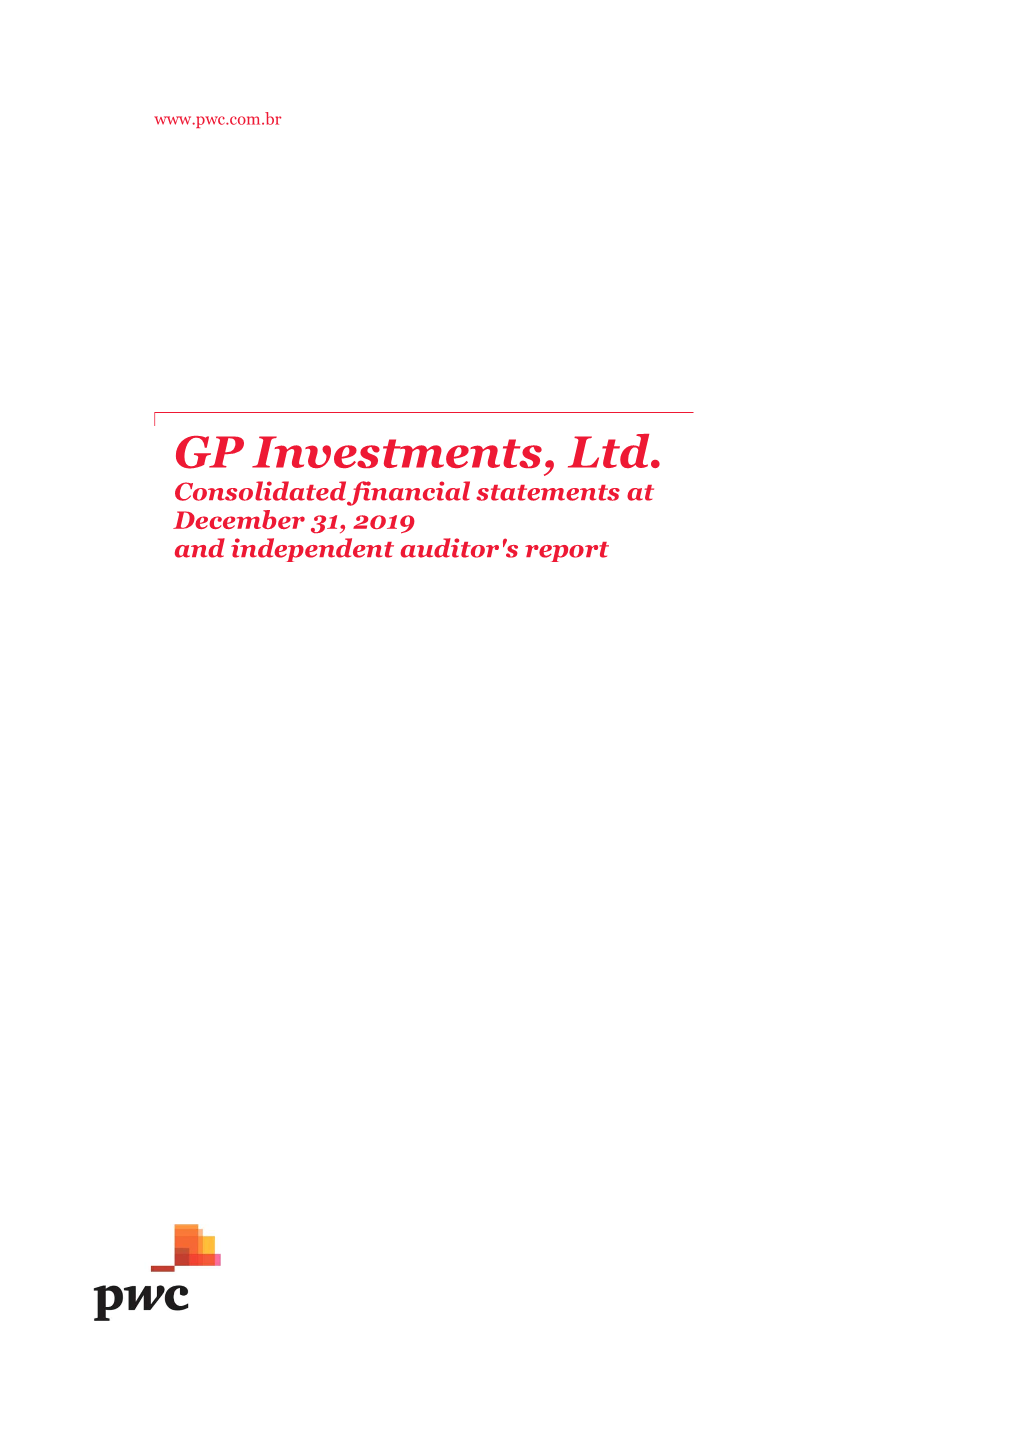 GP Investments, Ltd. Consolidated Financial Statements at December 31, 2019 and Independent Auditor's Report